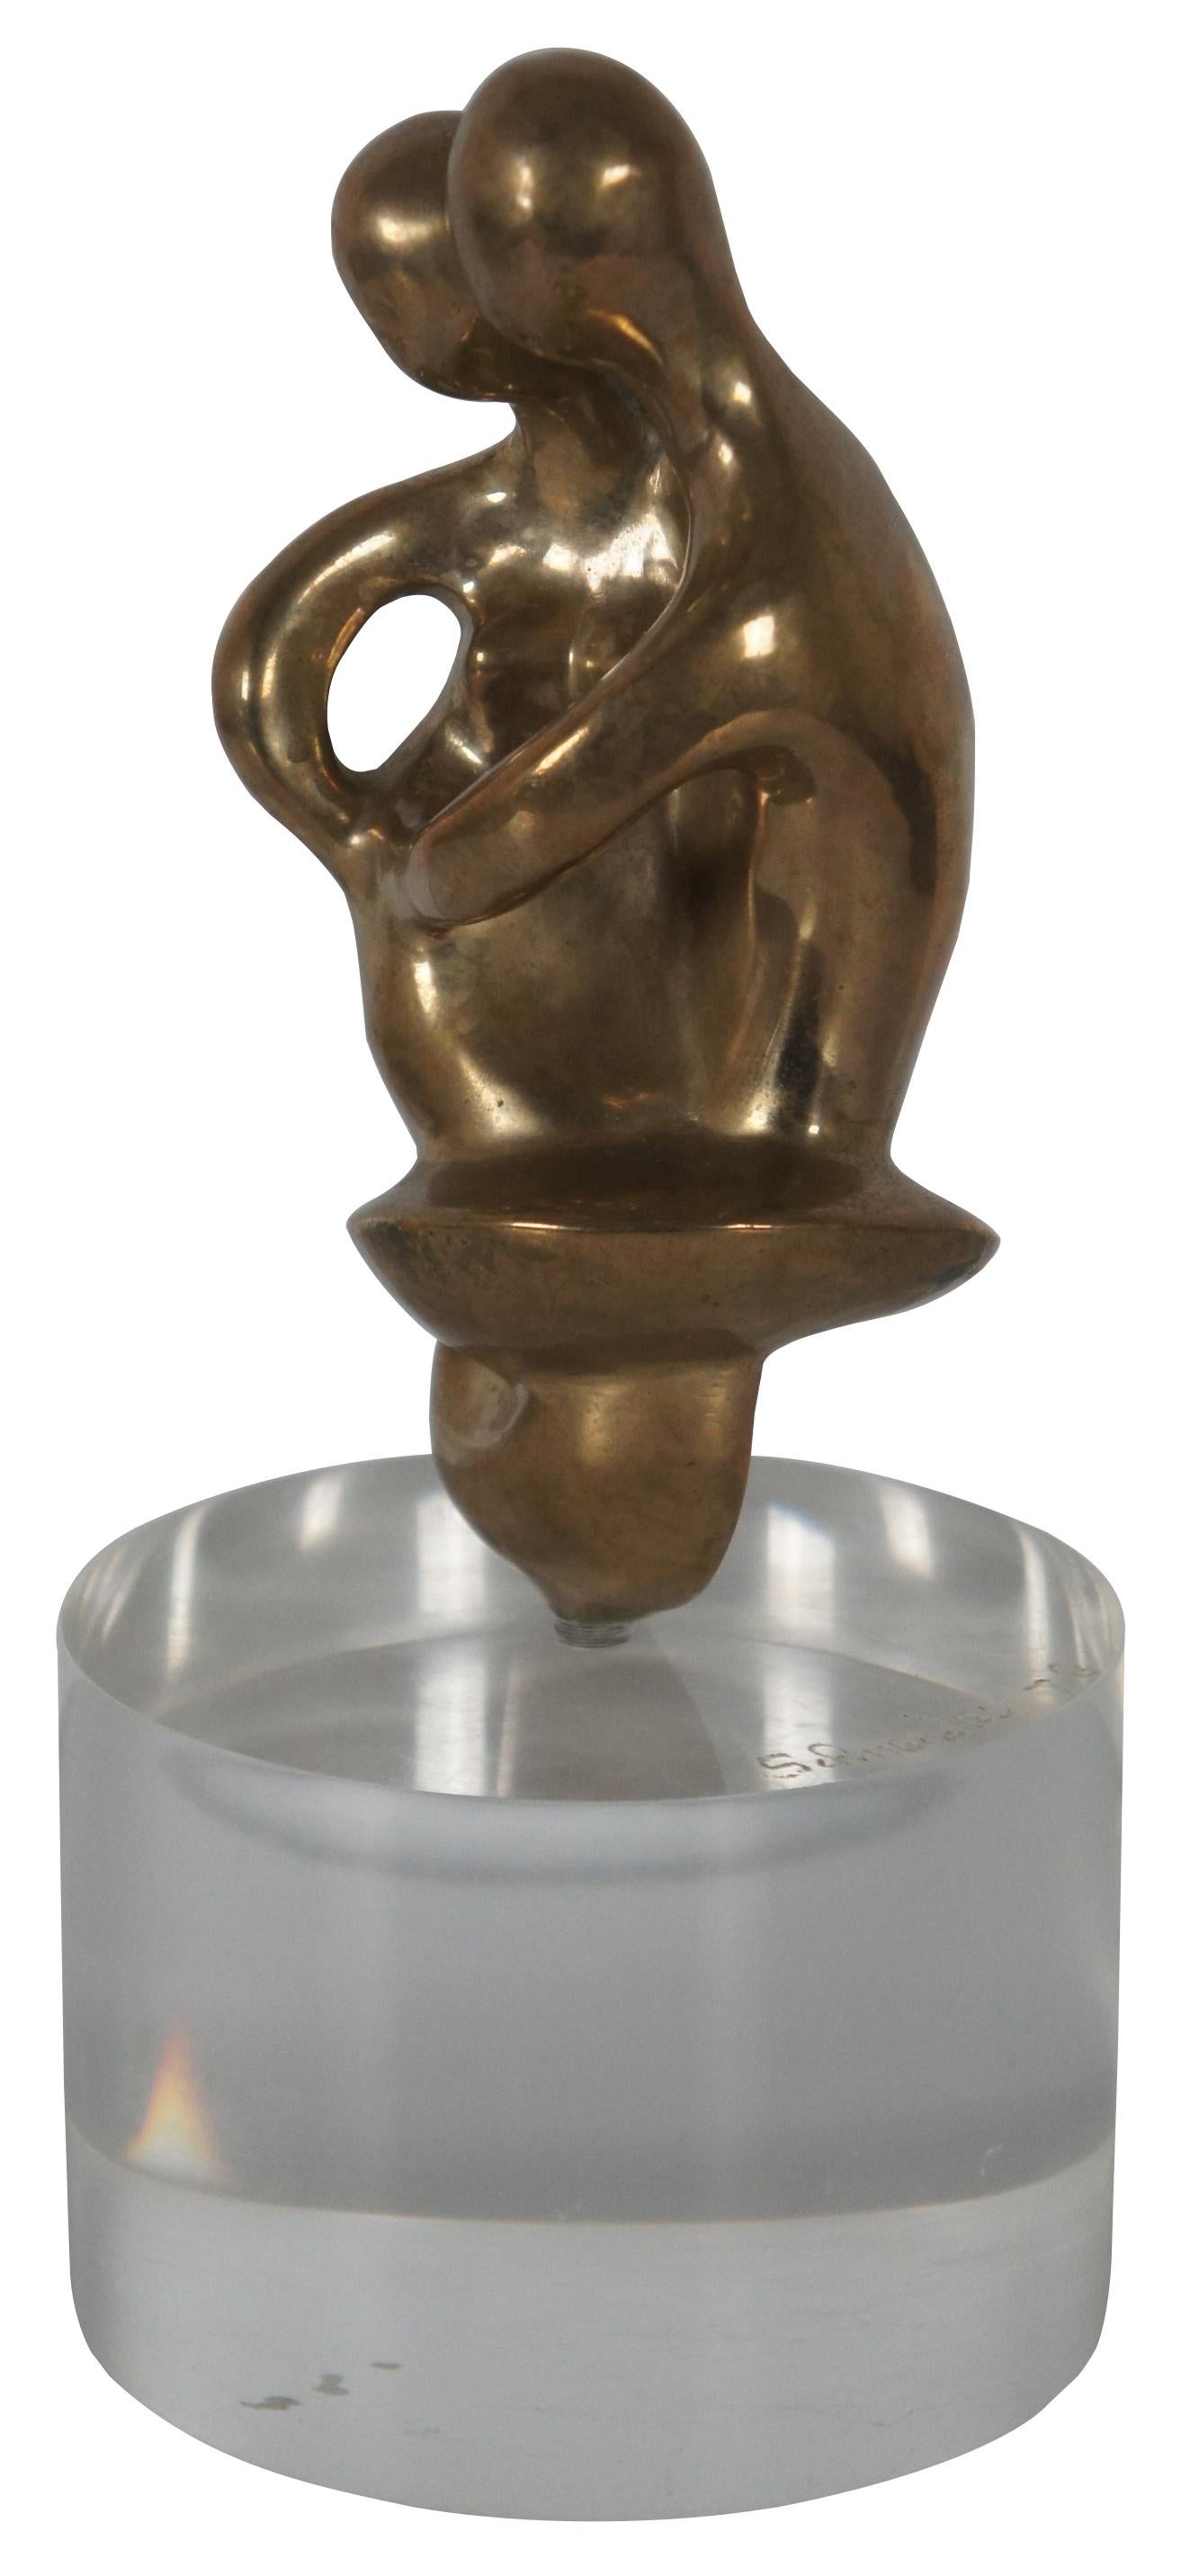 Vintage 1978 signed modern art sculpture by Arthur Schneider, an abstract brass figure of a couple embracing, mounted on a clear lucite base. Arthur Schneider (1929 - 1996) was active/lived in Michigan; he specialized in American Postwar &